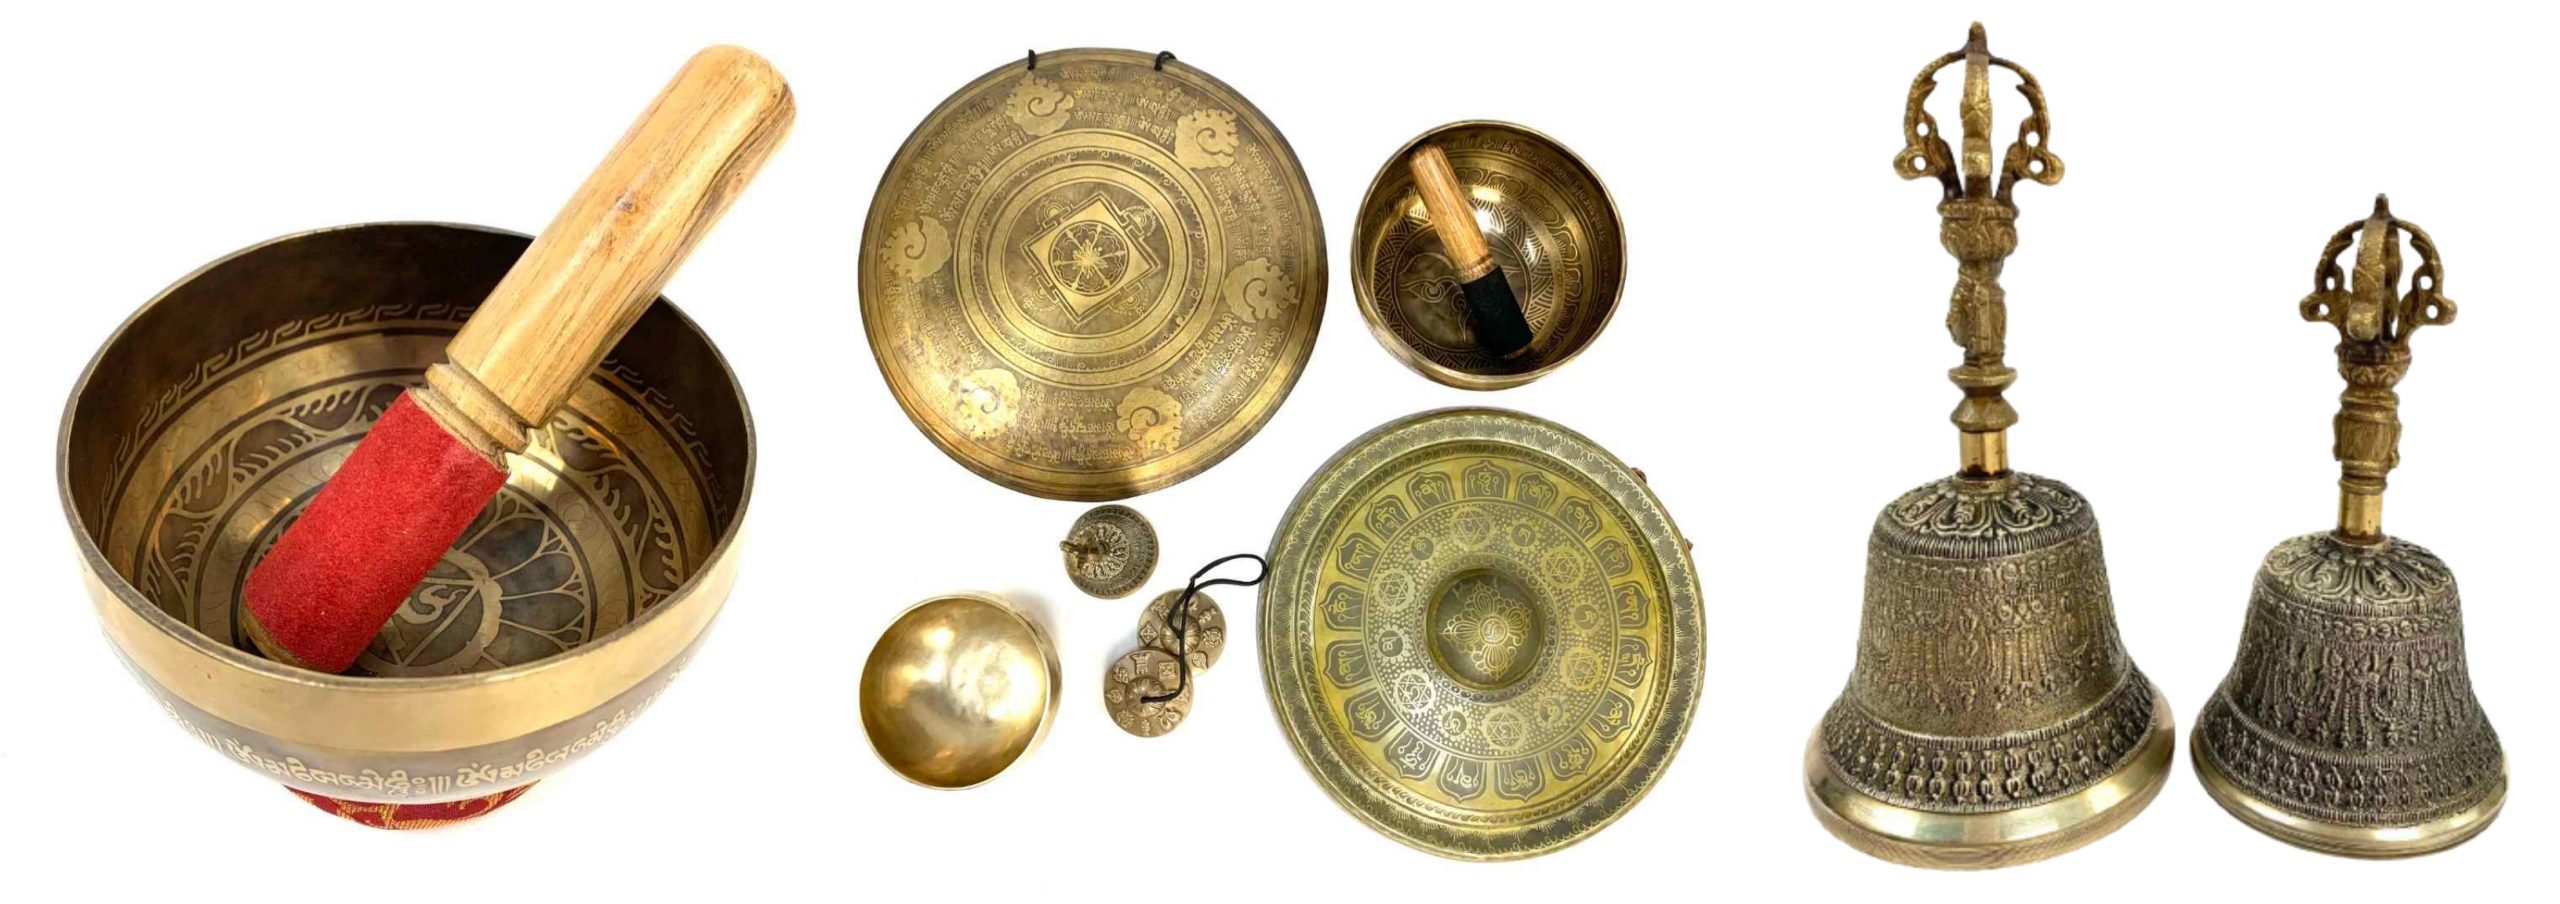 New sound healing instruments from Nepal. Perfect for meditation and therapy.